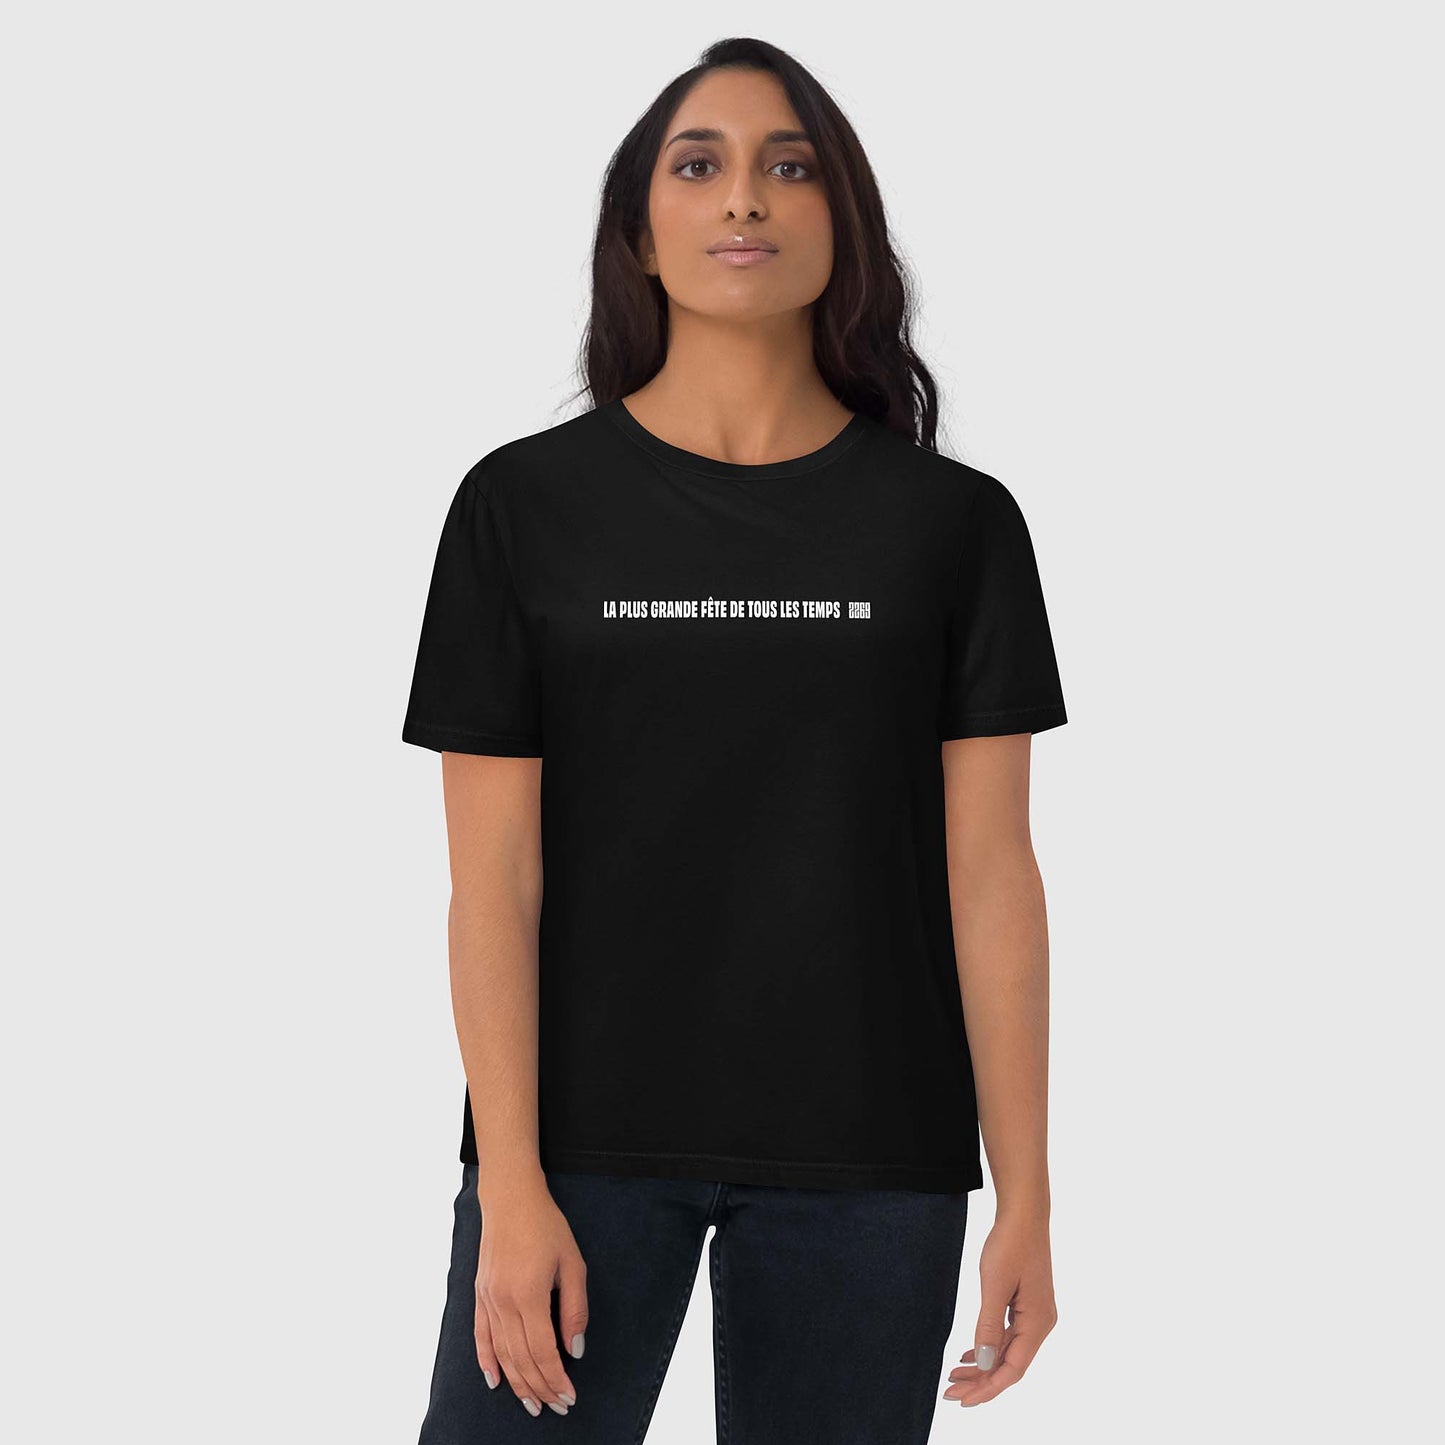 Unisex black organic cotton t-shirt with French 2269 party message